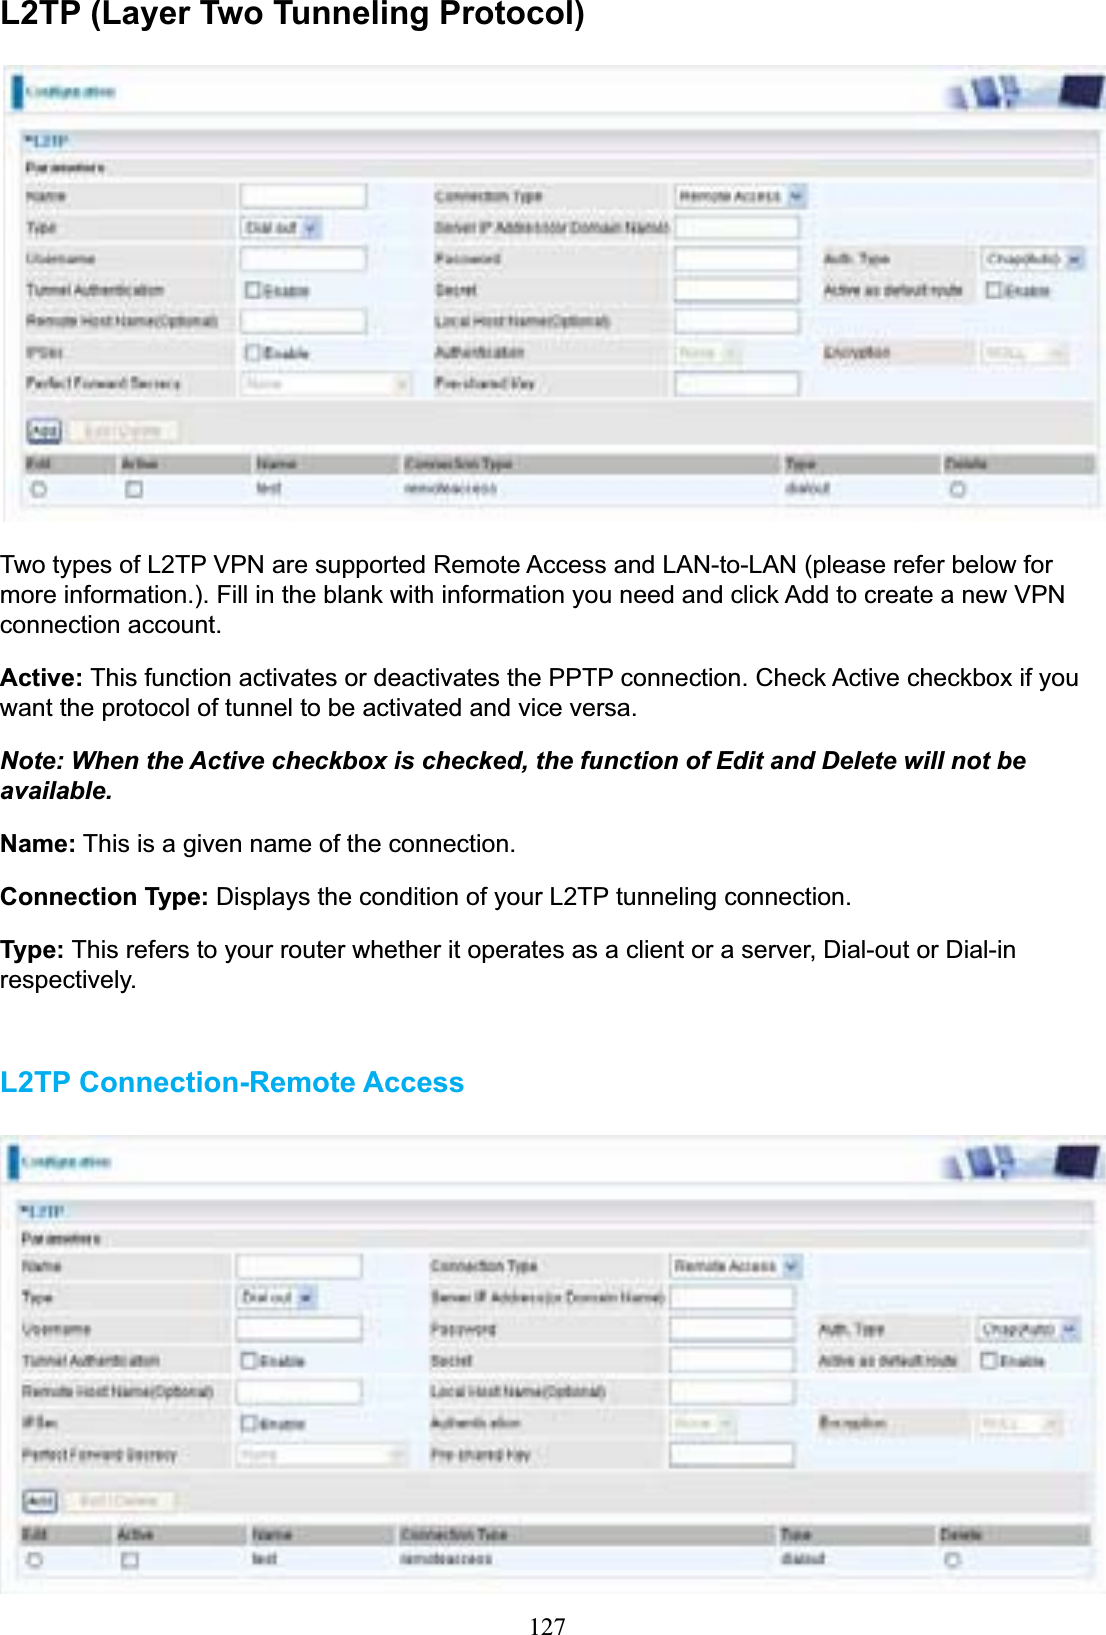 127L2TP (Layer Two Tunneling Protocol)Two types of L2TP VPN are supported Remote Access and LAN-to-LAN (please refer below for more information.). Fill in the blank with information you need and click Add to create a new VPN connection account. Active: This function activates or deactivates the PPTP connection. Check Active checkbox if you want the protocol of tunnel to be activated and vice versa. Note: When the Active checkbox is checked, the function of Edit and Delete will not be available.Name: This is a given name of the connection. Connection Type: Displays the condition of your L2TP tunneling connection. Type: This refers to your router whether it operates as a client or a server, Dial-out or Dial-in respectively. L2TP Connection-Remote Access